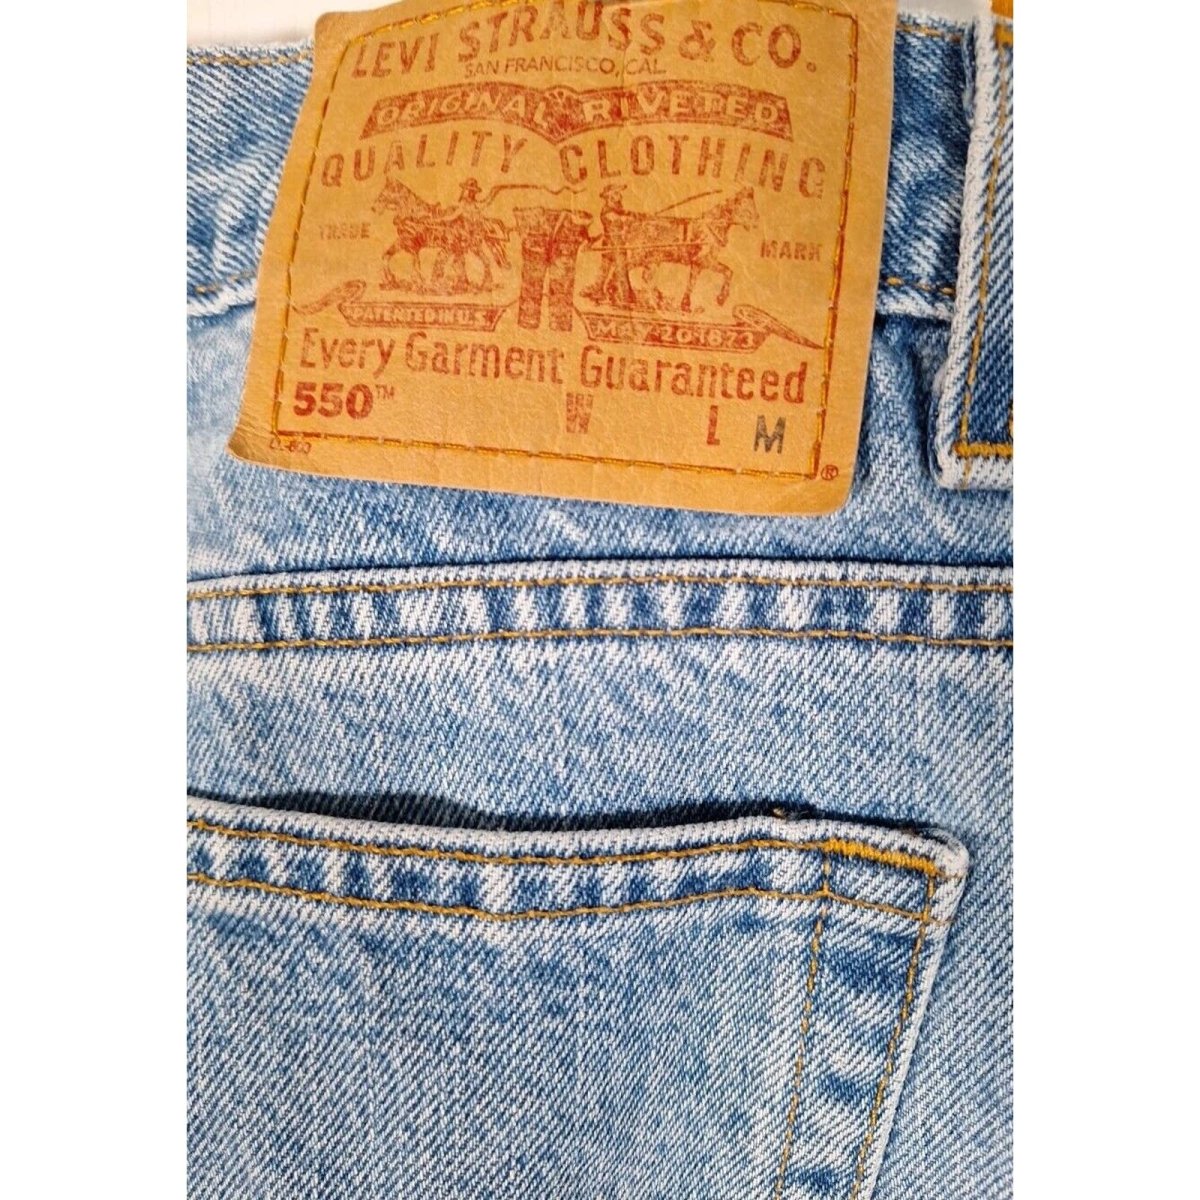 Vintage 90s/Y2K Levis 550 All Cotton Stone Wash Jeans Unisex Size 34x30 Women 12 - themallvintage The Mall Vintage